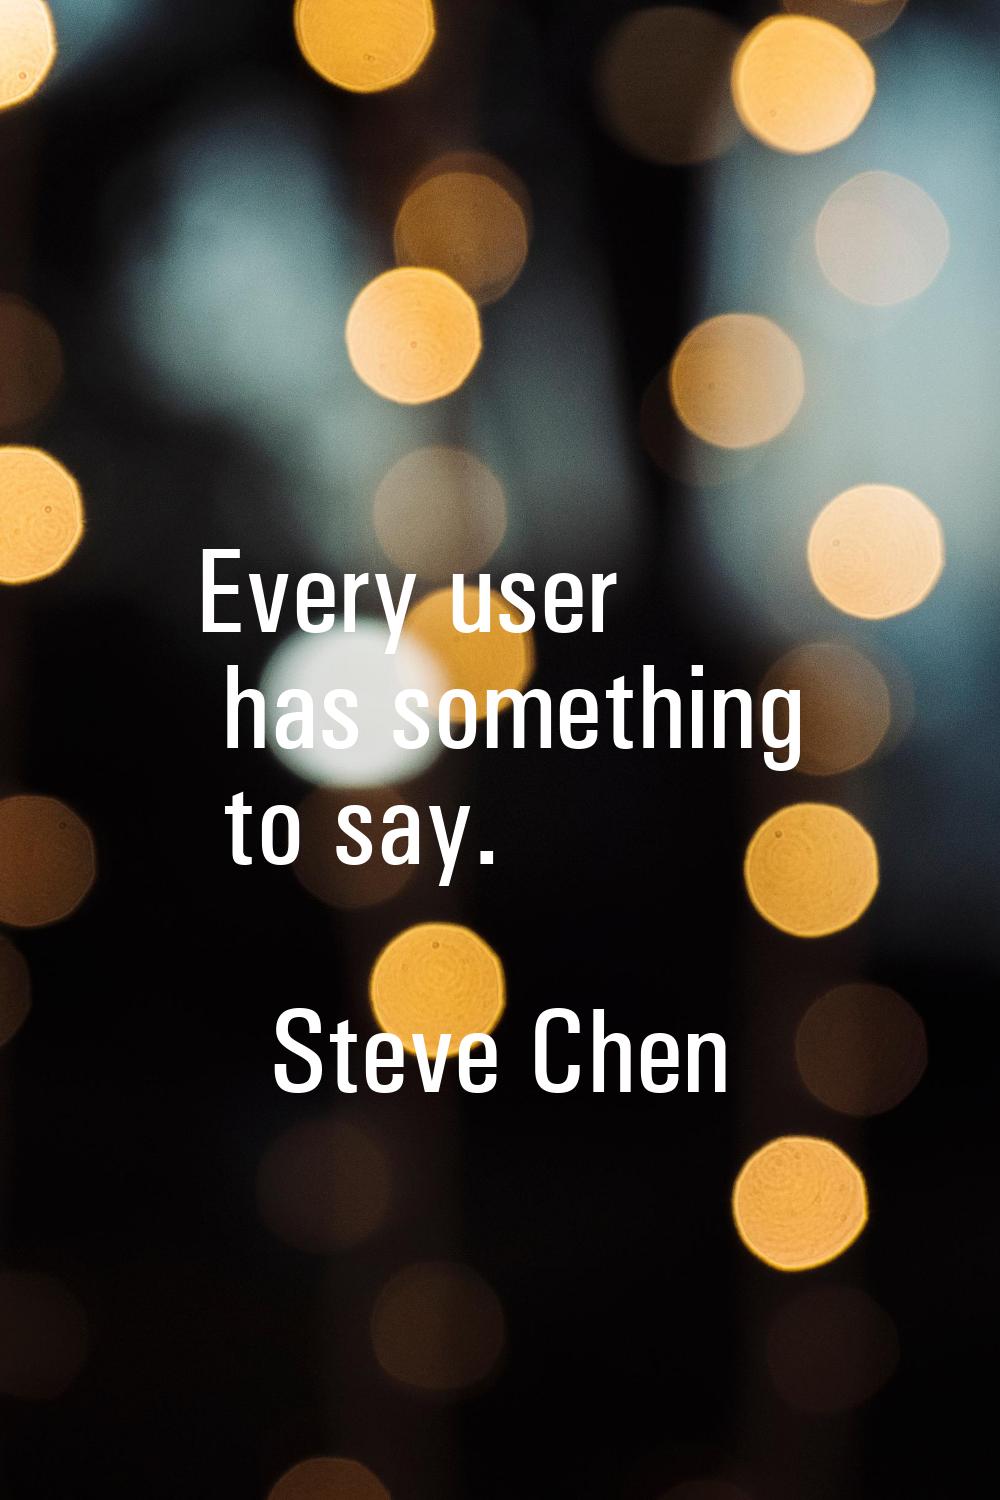 Every user has something to say.